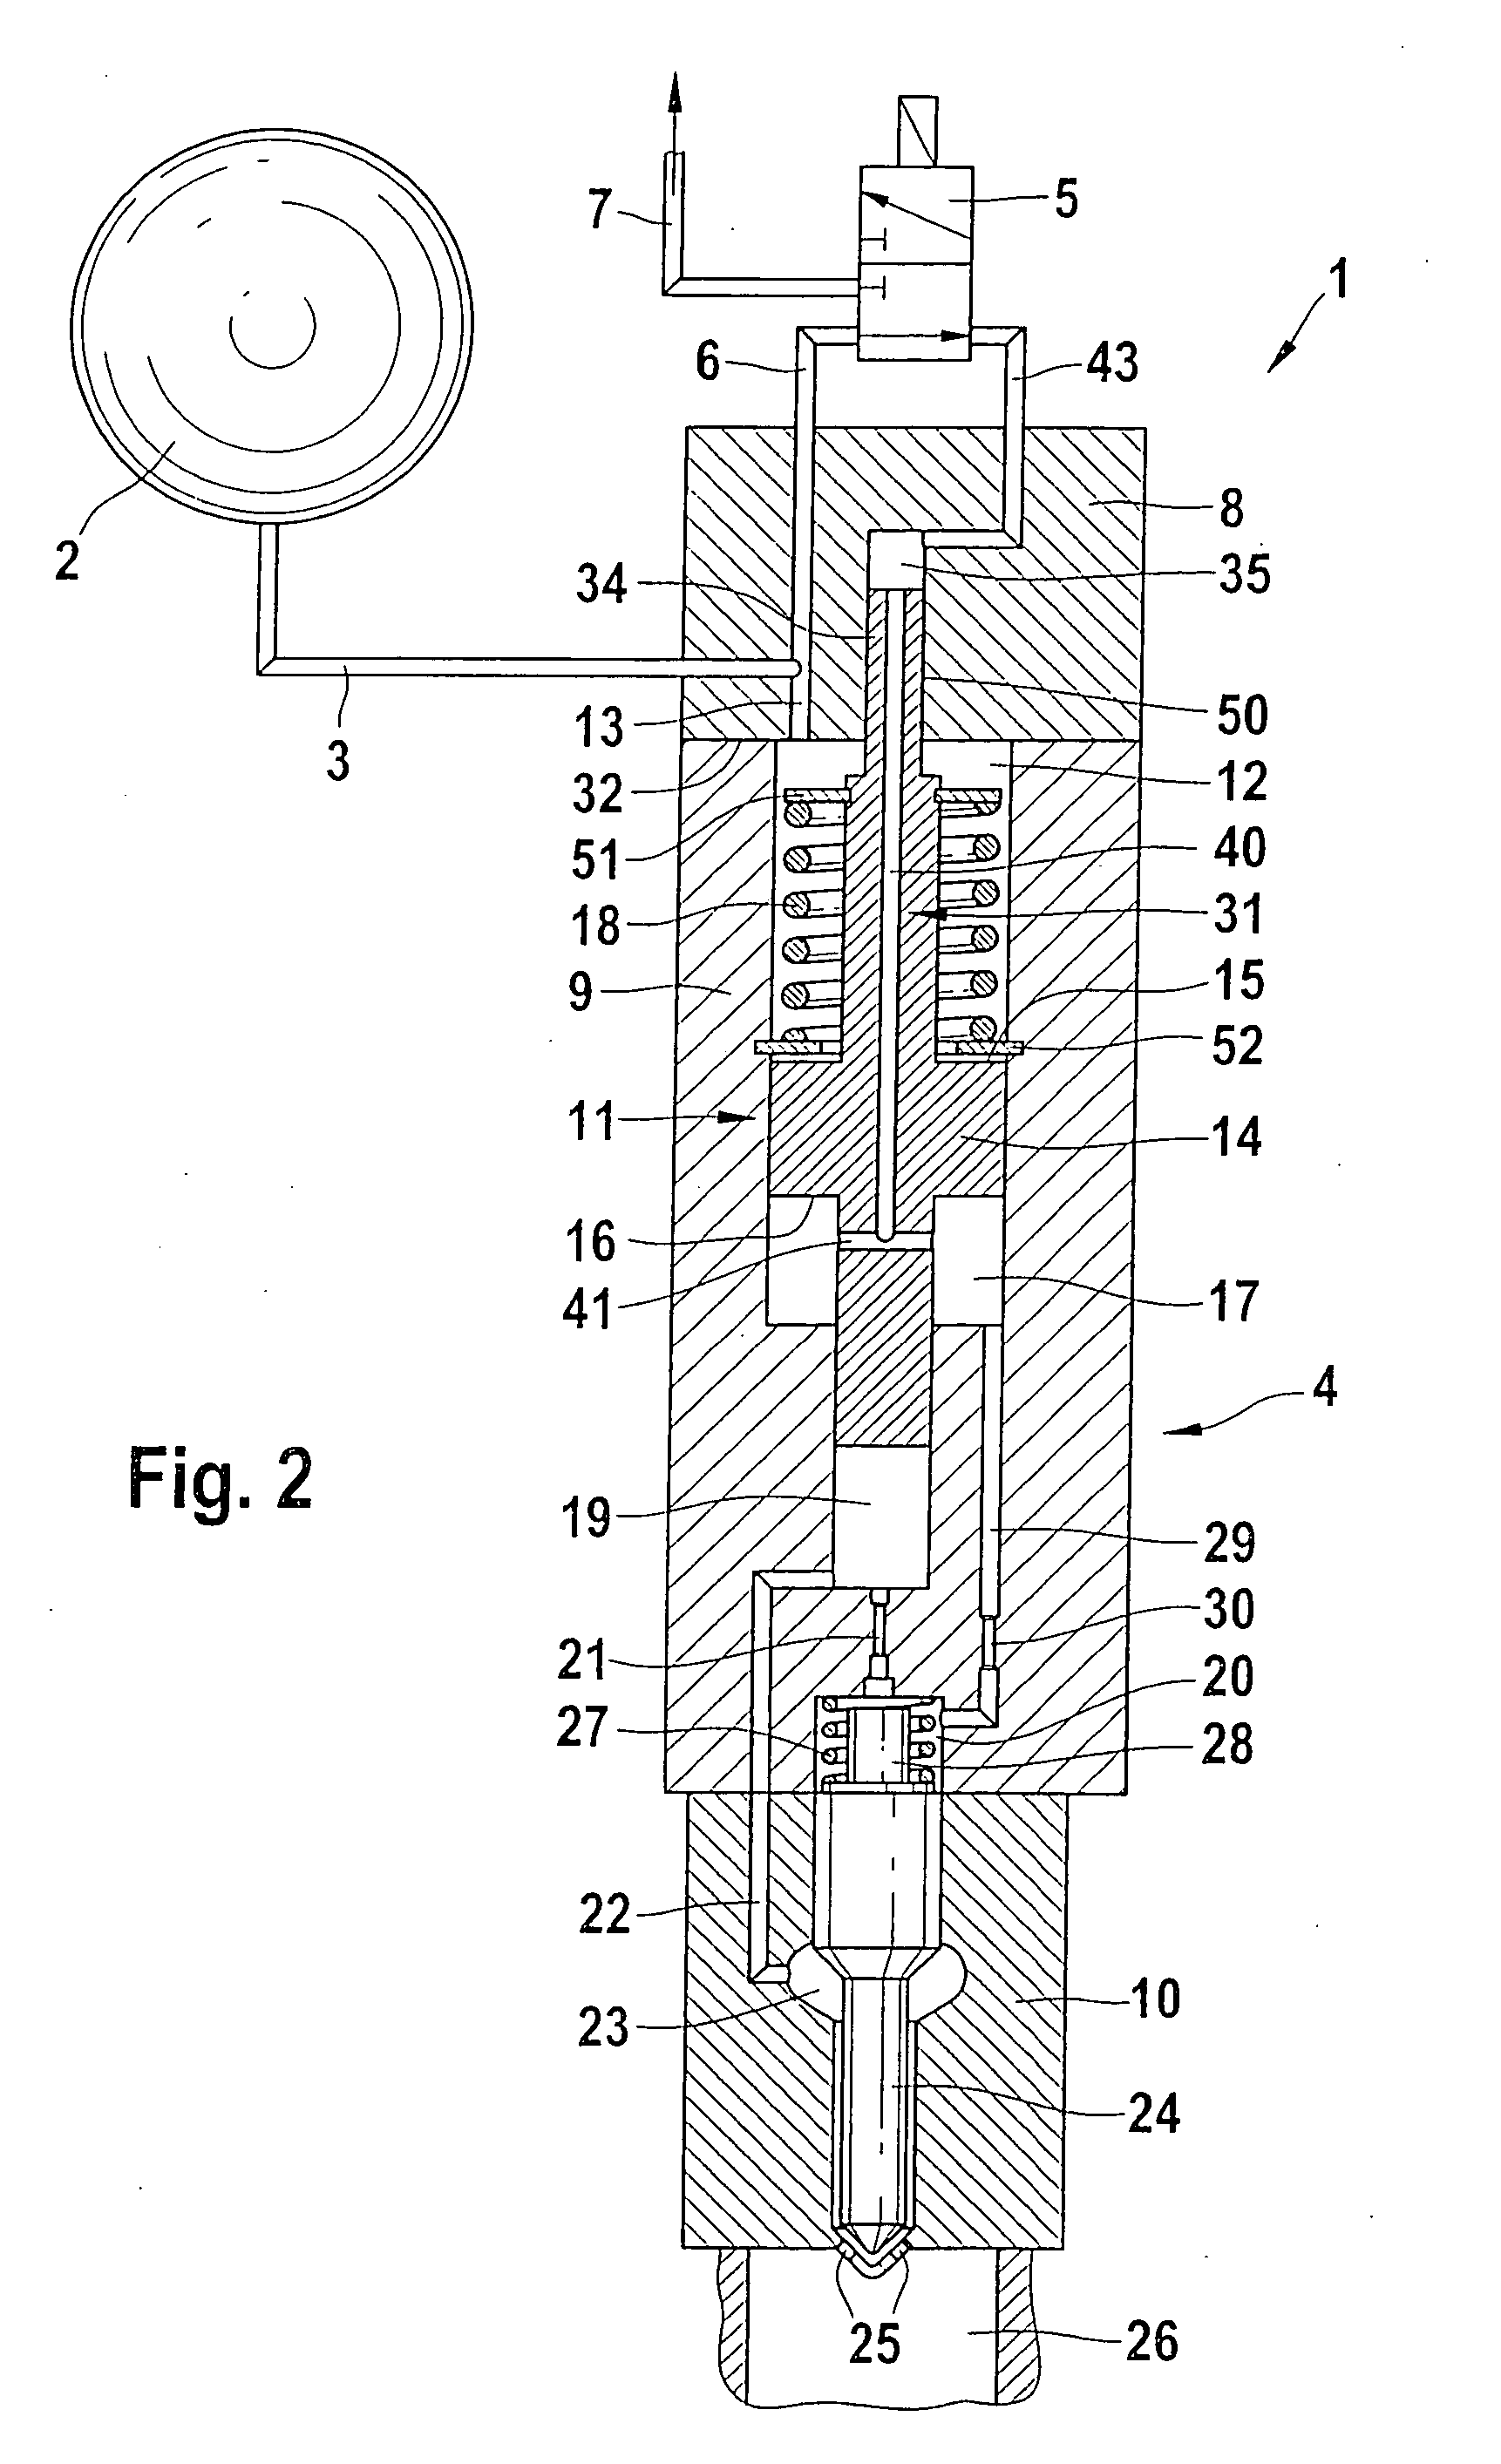 Pressure-boosted fuel injection device comprising an internal control line